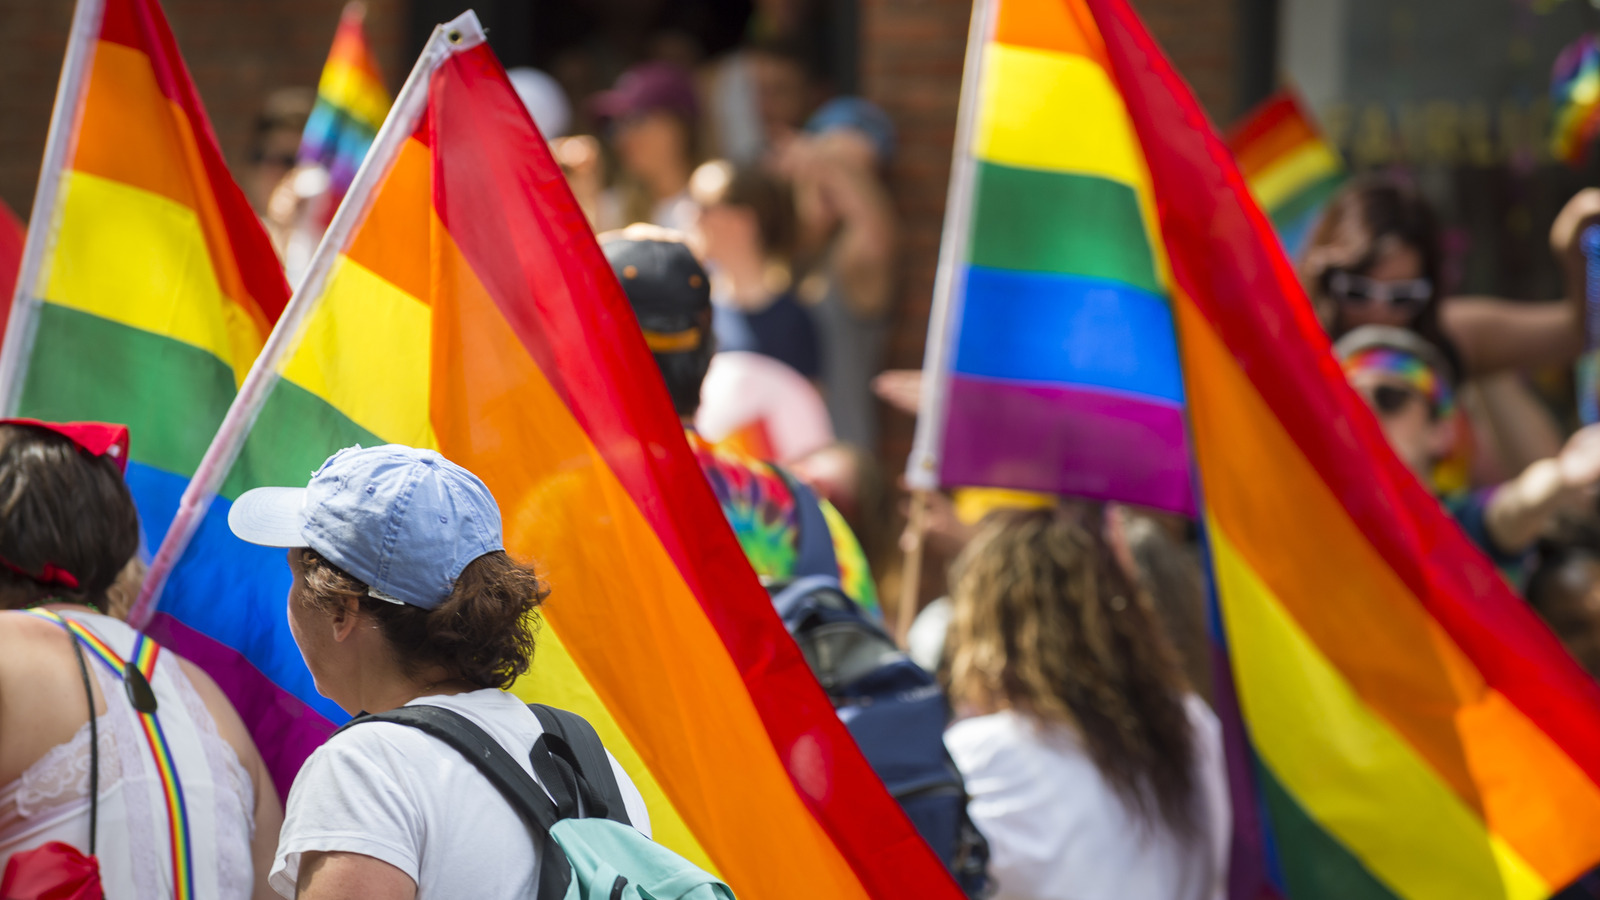 5 Ways To Celebrate Pride Month Without Going To A Parade